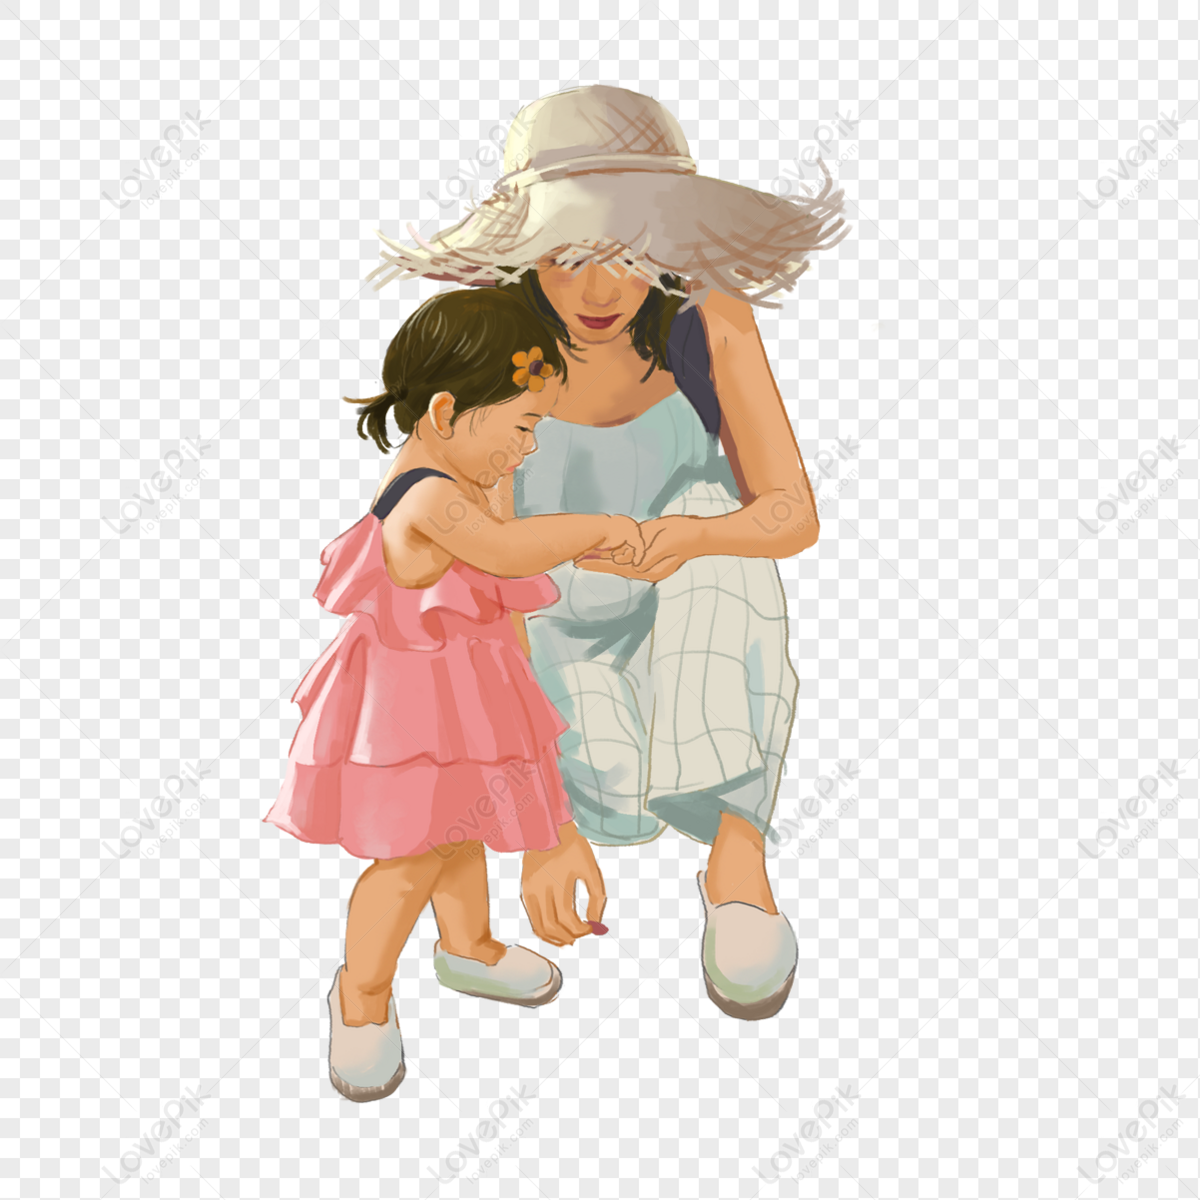 Drawing of mother and daughter hugging each other with love.